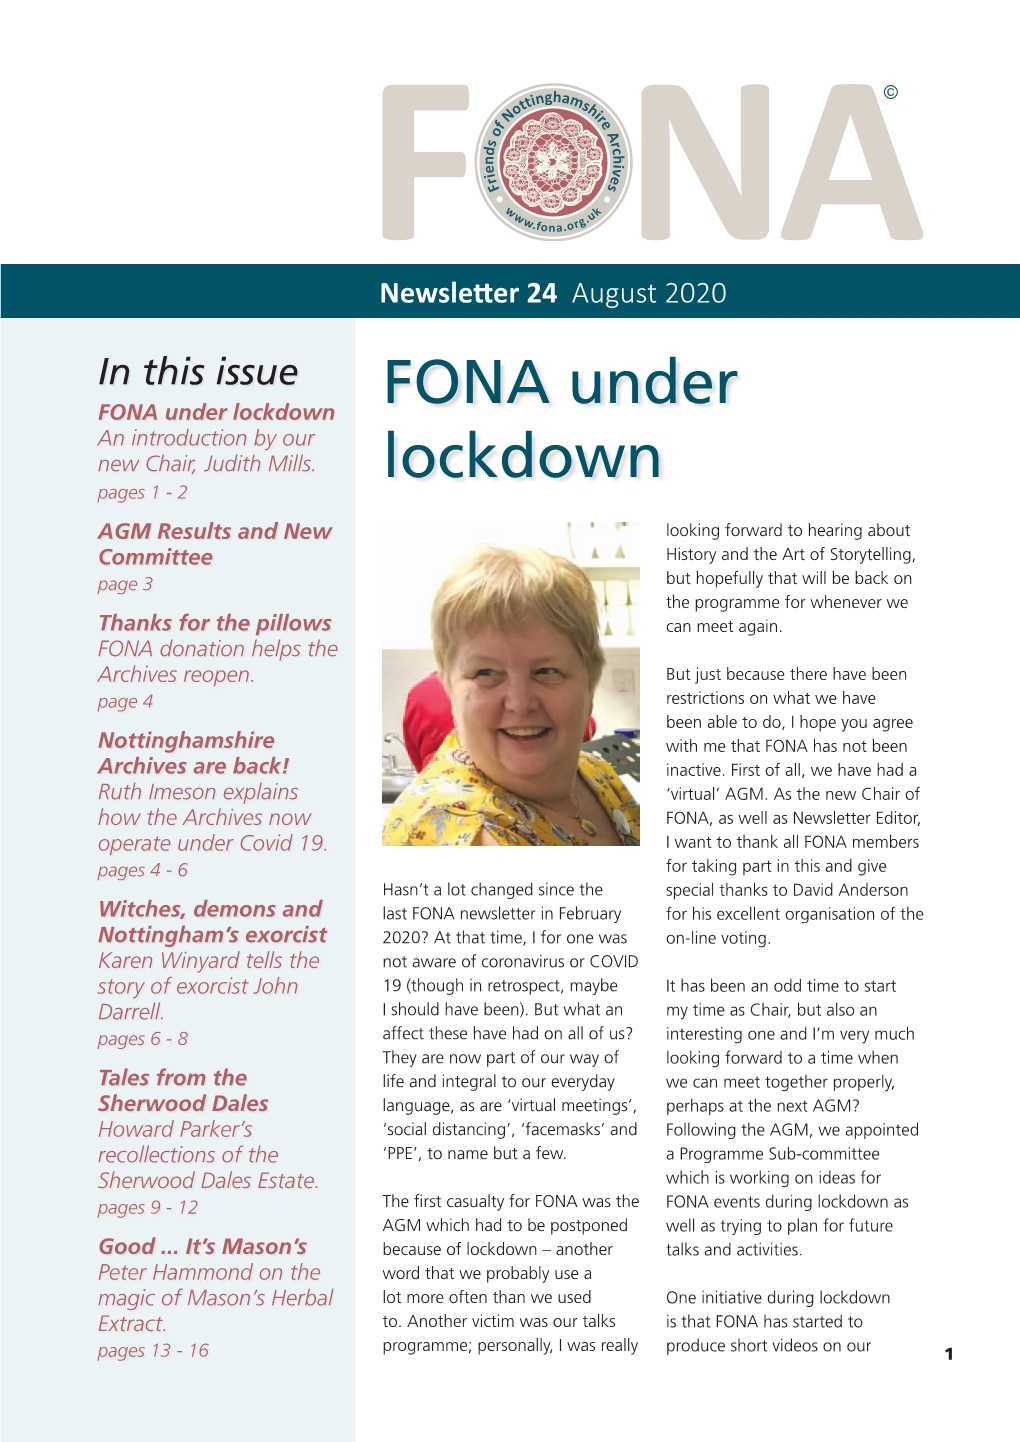 FONA Under Lockdown FONA Under an Introduction by Our New Chair, Judith Mills